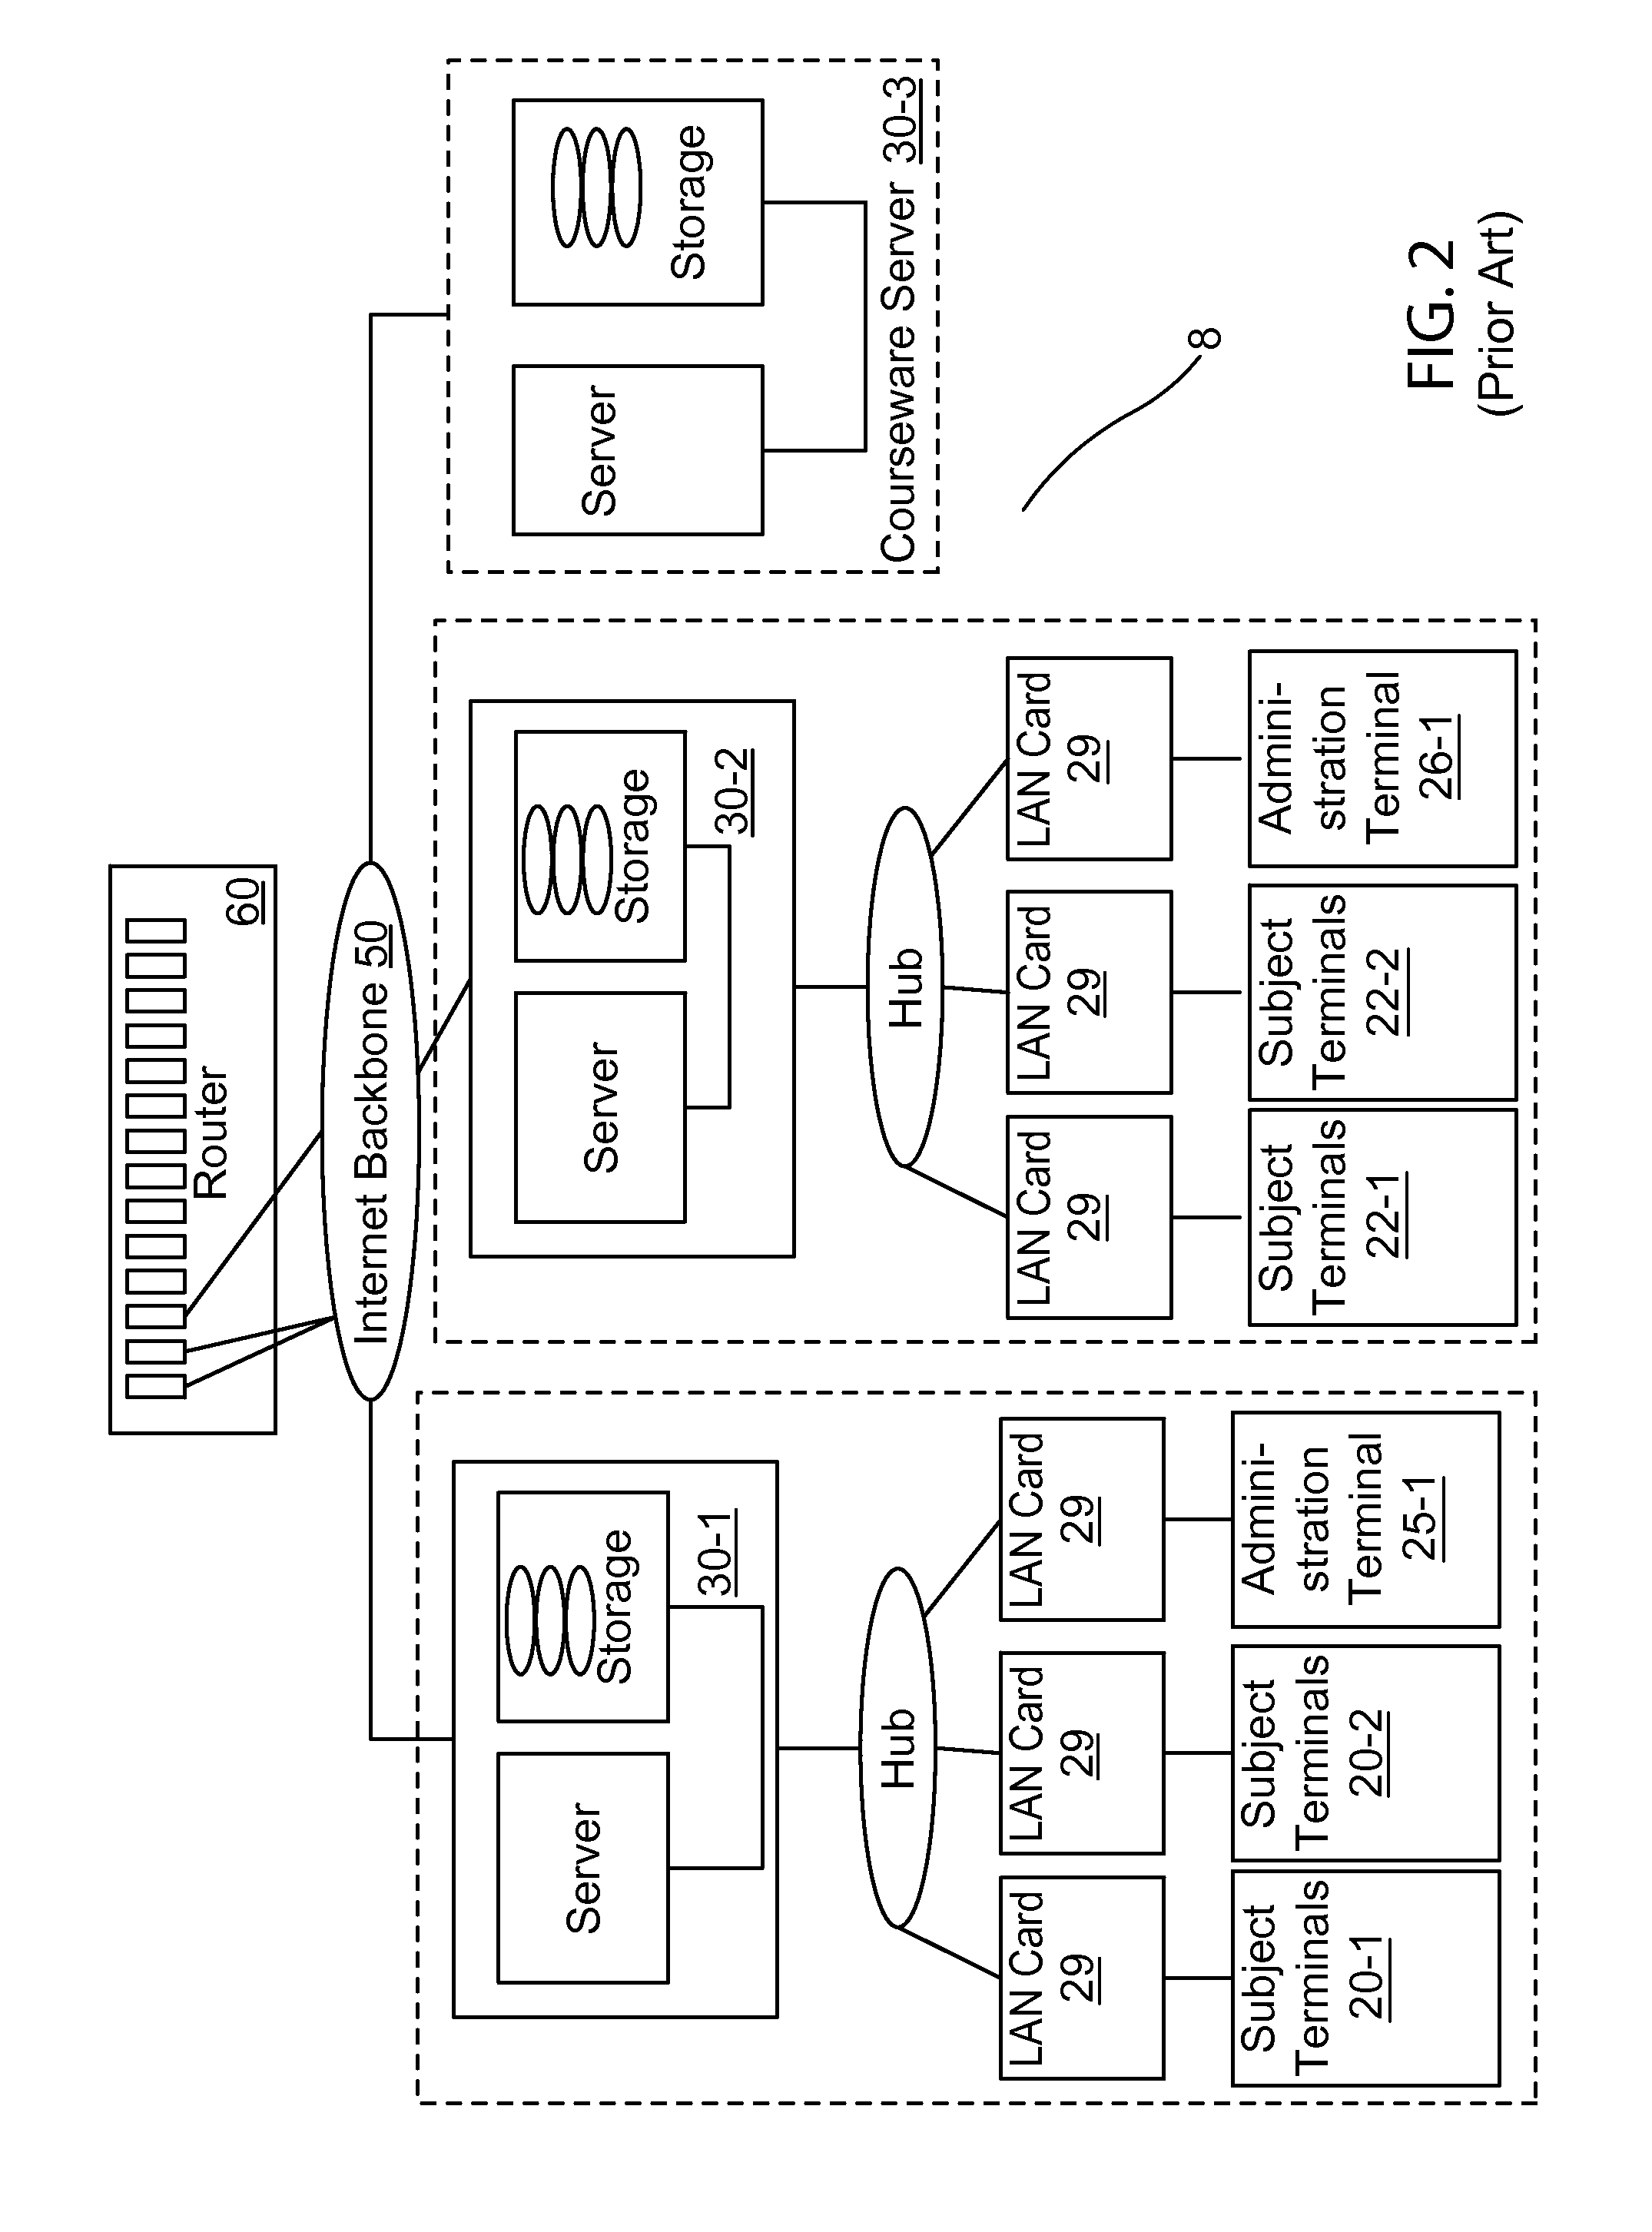 System and Method for Adaptive Knowledge Assessment And Learning